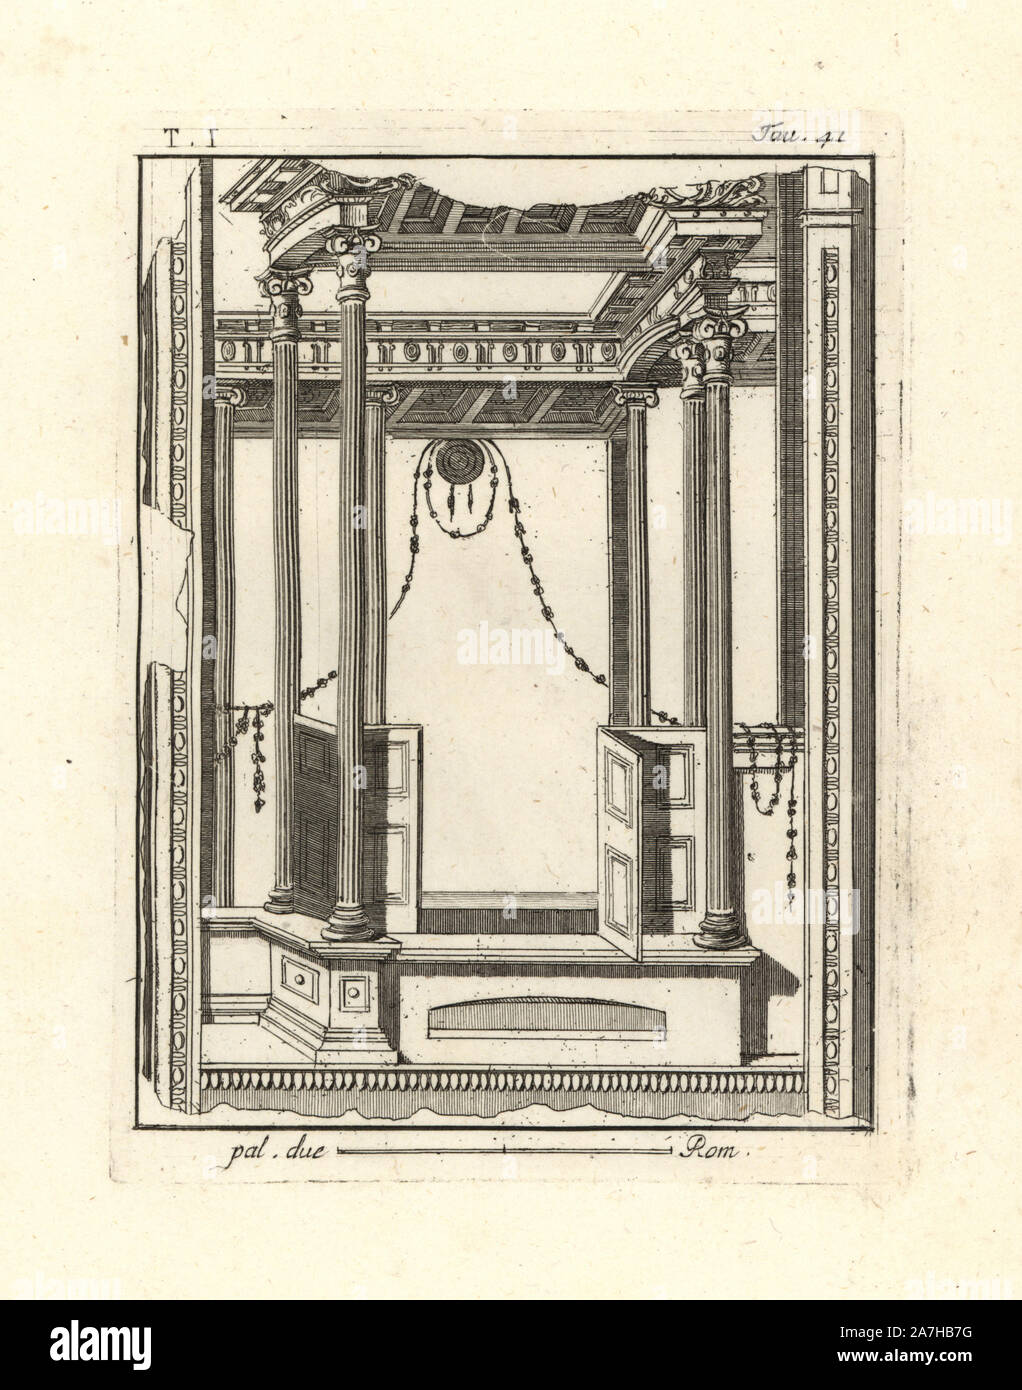 Wall painting excavated in Resina showing a portal, with candelabra-shaped columns, chest-high walls or plutei, cornices and portico. The tympanum or shield decorated with a garland could indicate that it is a temple portal. Copperplate engraved by Tommaso Piroli from his own 'Antichita di Ercolano' (Antiquities of Herculaneum), Rome, 1789.  Italian artist and engraver Piroli (1752-1824) published six volumes between 1789 and 1807 documenting the murals and bronzes found in Heraculaneum and Pompeii. Stock Photo